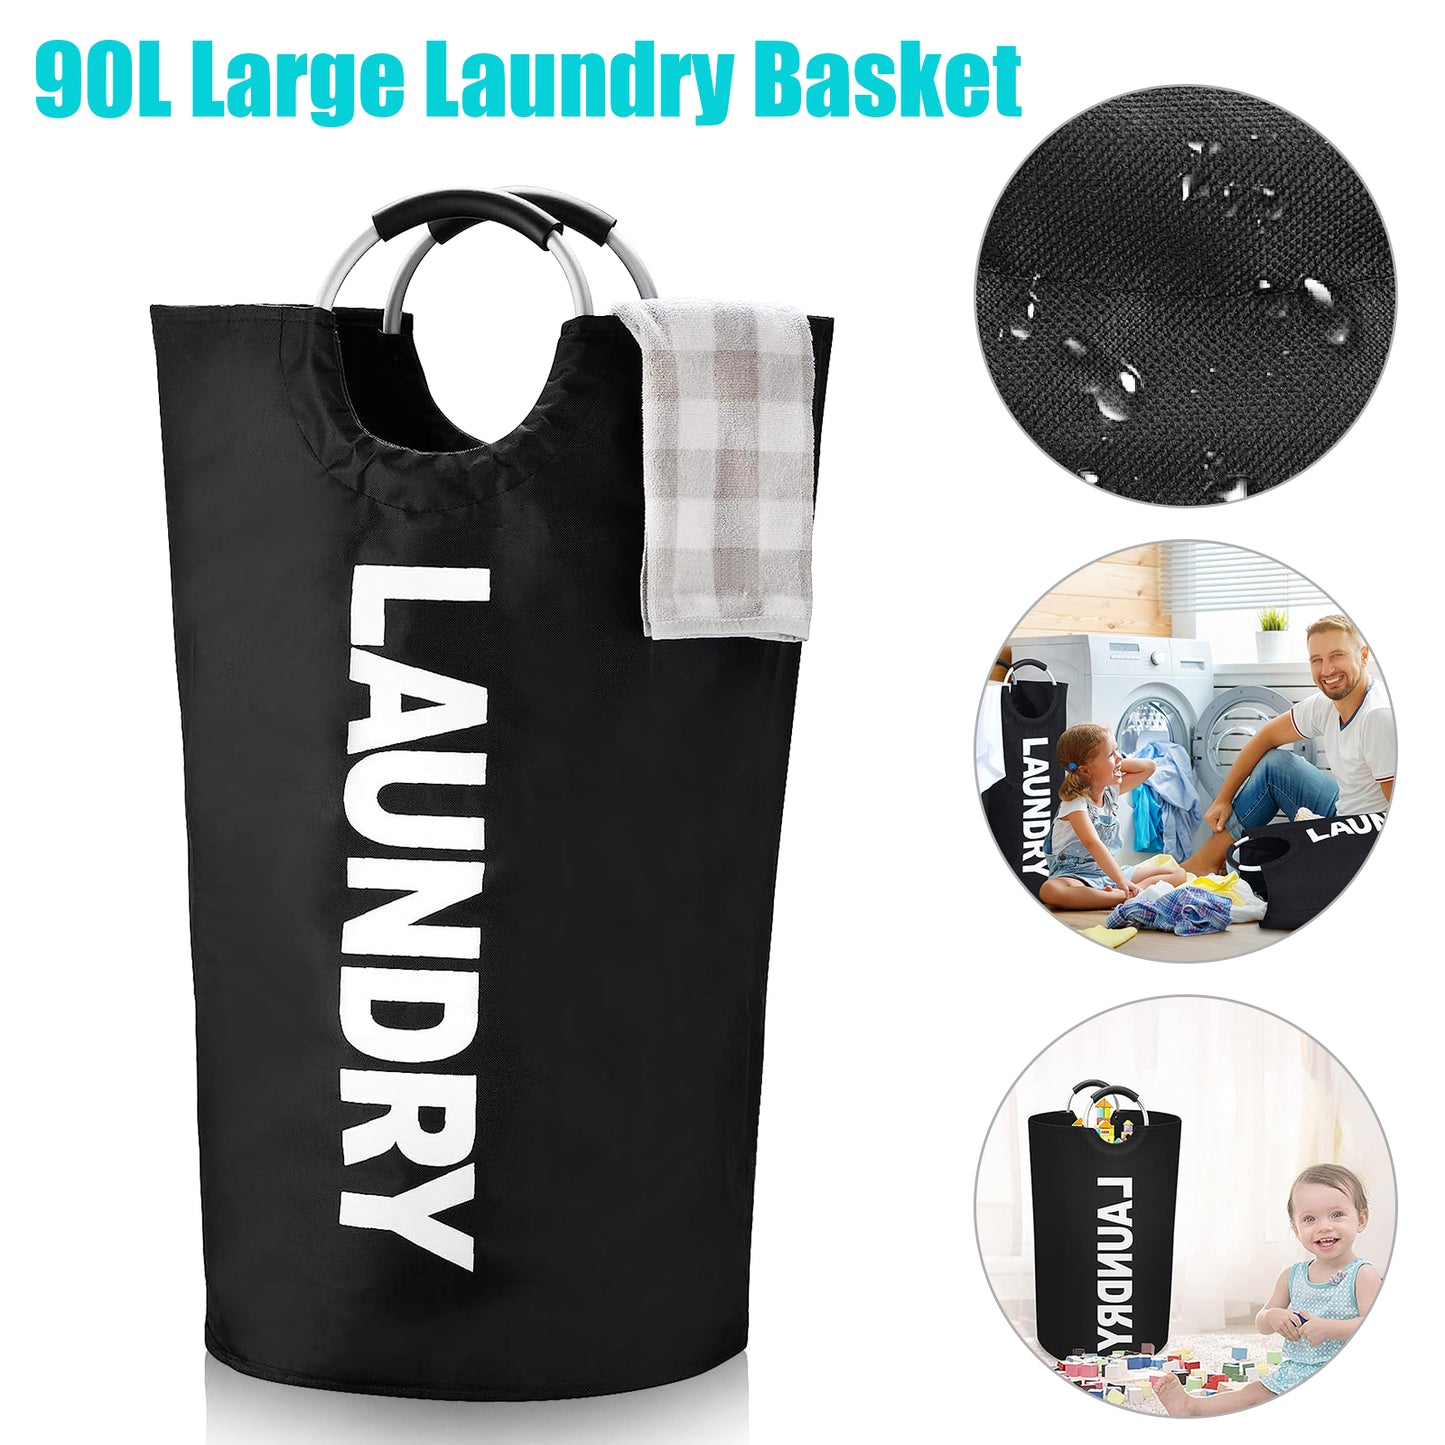 90L Large Laundry Basket - Collapsible Laundry Basket Laundry Hamper, Dirty Clothes Hamper, Waterproof Laundry Basket with Handles for Travel Family (BLACK)